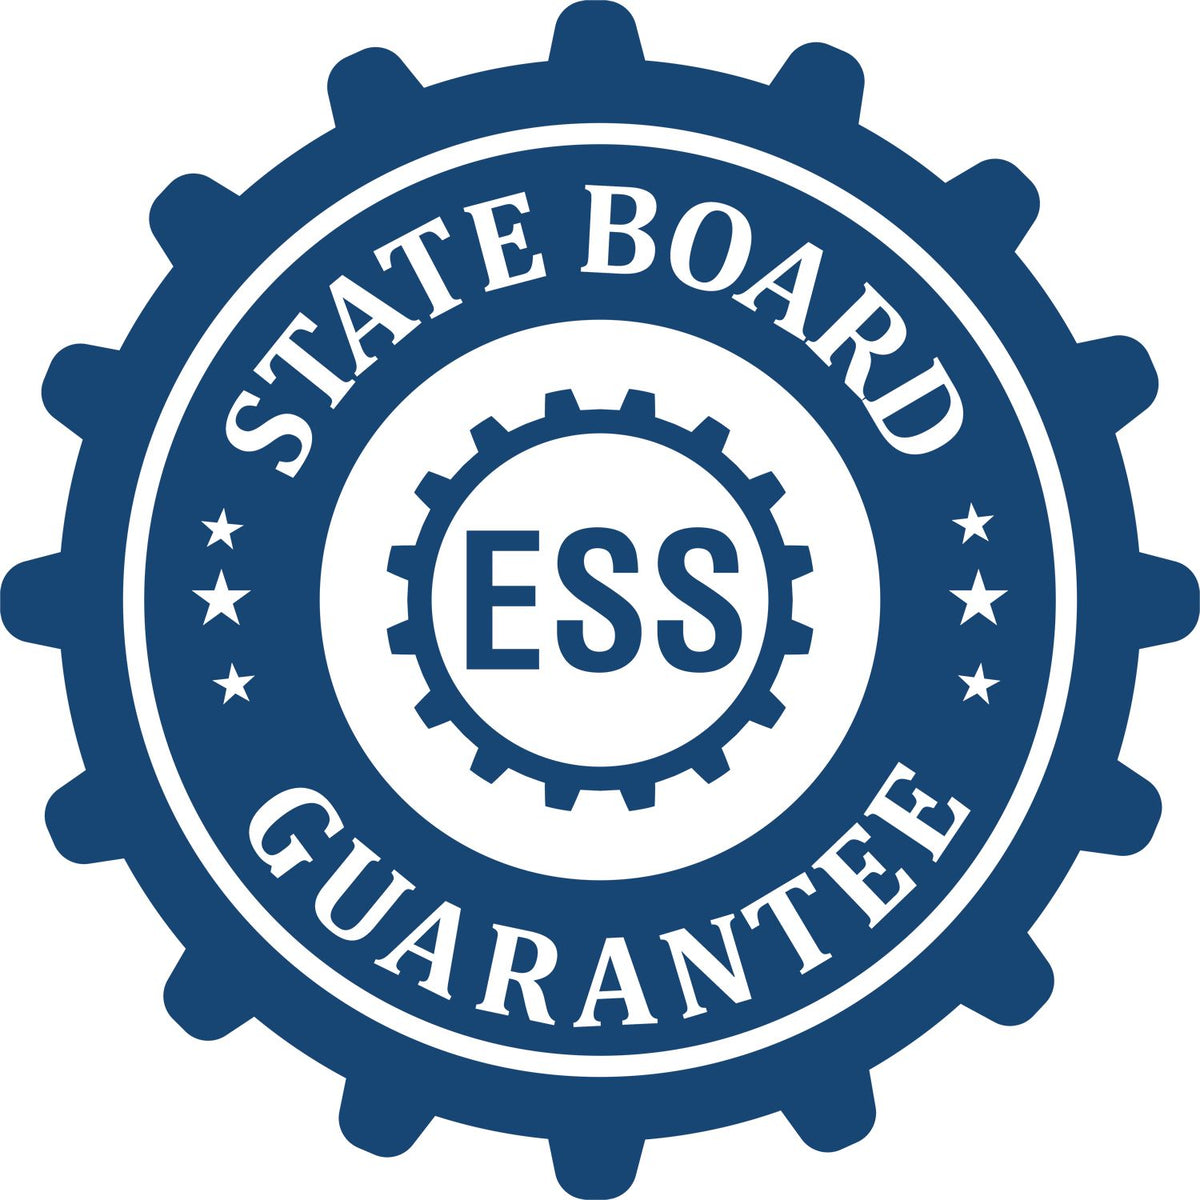 An emblem in a gear shape illustrating a state board guarantee for the Digital Idaho PE Stamp and Electronic Seal for Idaho Engineer product.